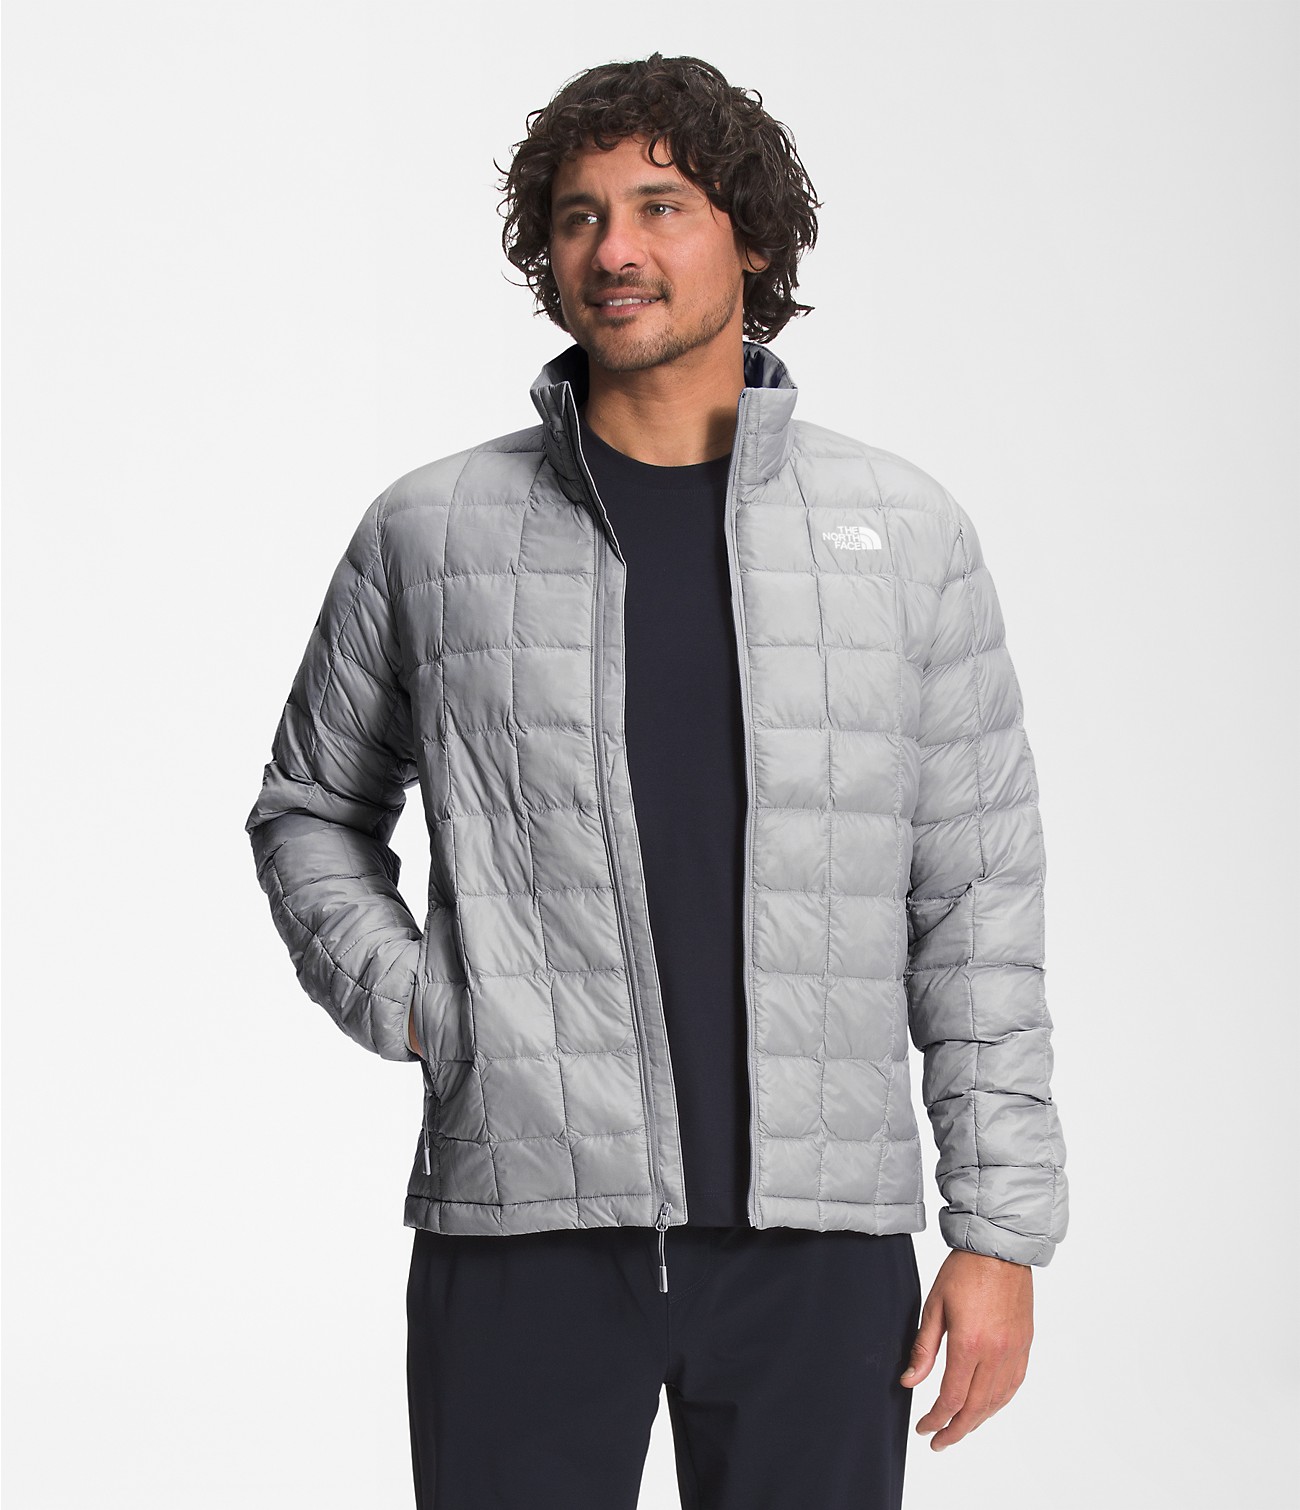 Unlock Wilderness' choice in the Canada Goose Vs North Face comparison, the ThermoBall™ Eco Jacket 2.0 by The North Face